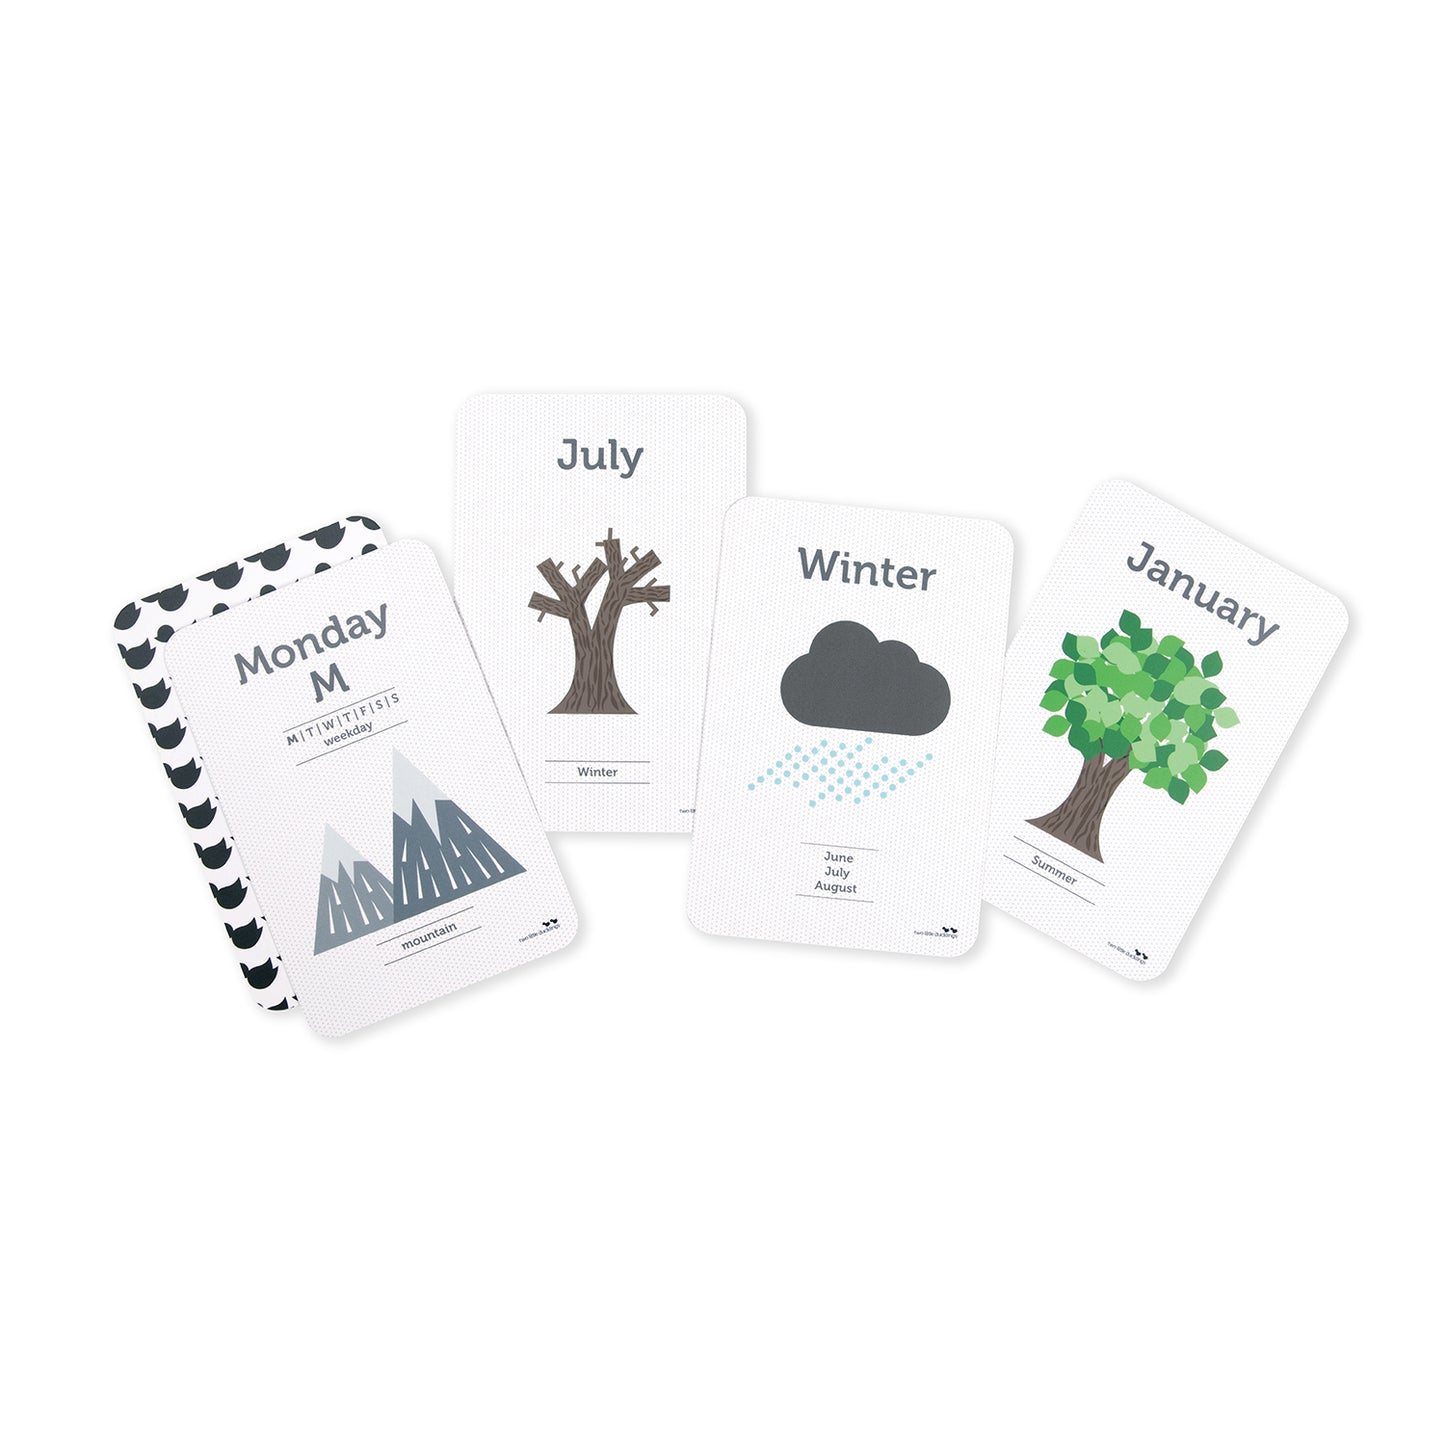 Days, Months and Seasons | Flash Cards